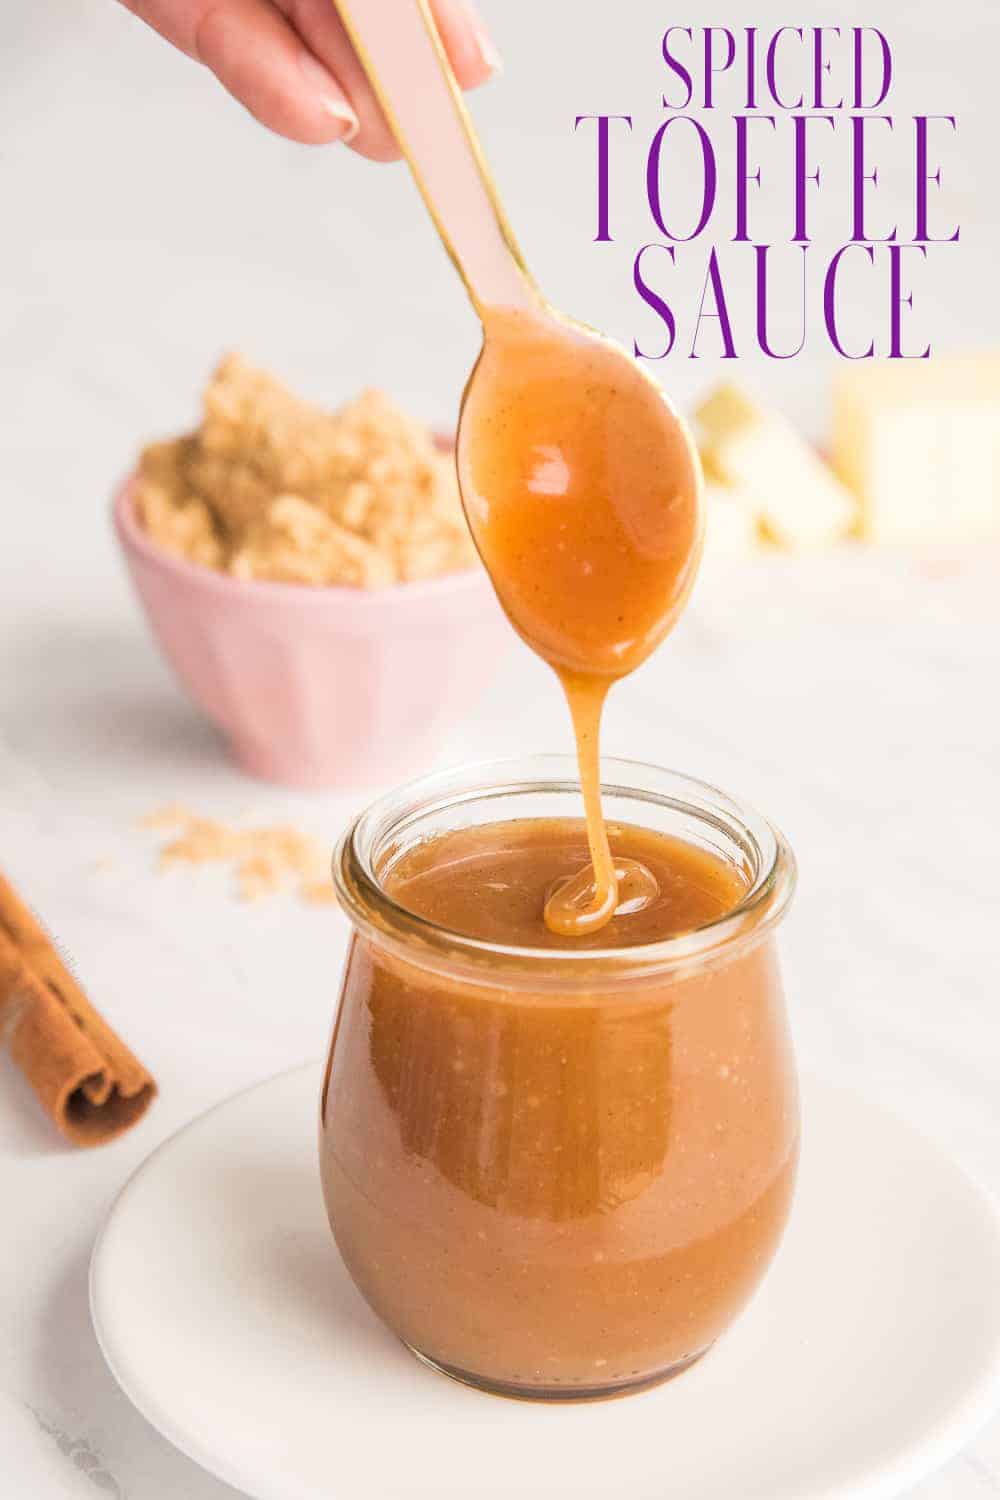 This Spiced Toffee Sauce is buttery, creamy, and flecked with warm spices. Use it as a dessert topping or stir it into your favorite warm or chilled drinks. It's a great way to elevate basic desserts or drinks. #toffeesauce #dessertsauce #sauce #brownsugar #butter #stickytoffeepudding #drinkflavorings #caramel #dessert #drinks #desserttopping #icecreamrecipe #cheesecakerecipe #syrup via @ediblesense